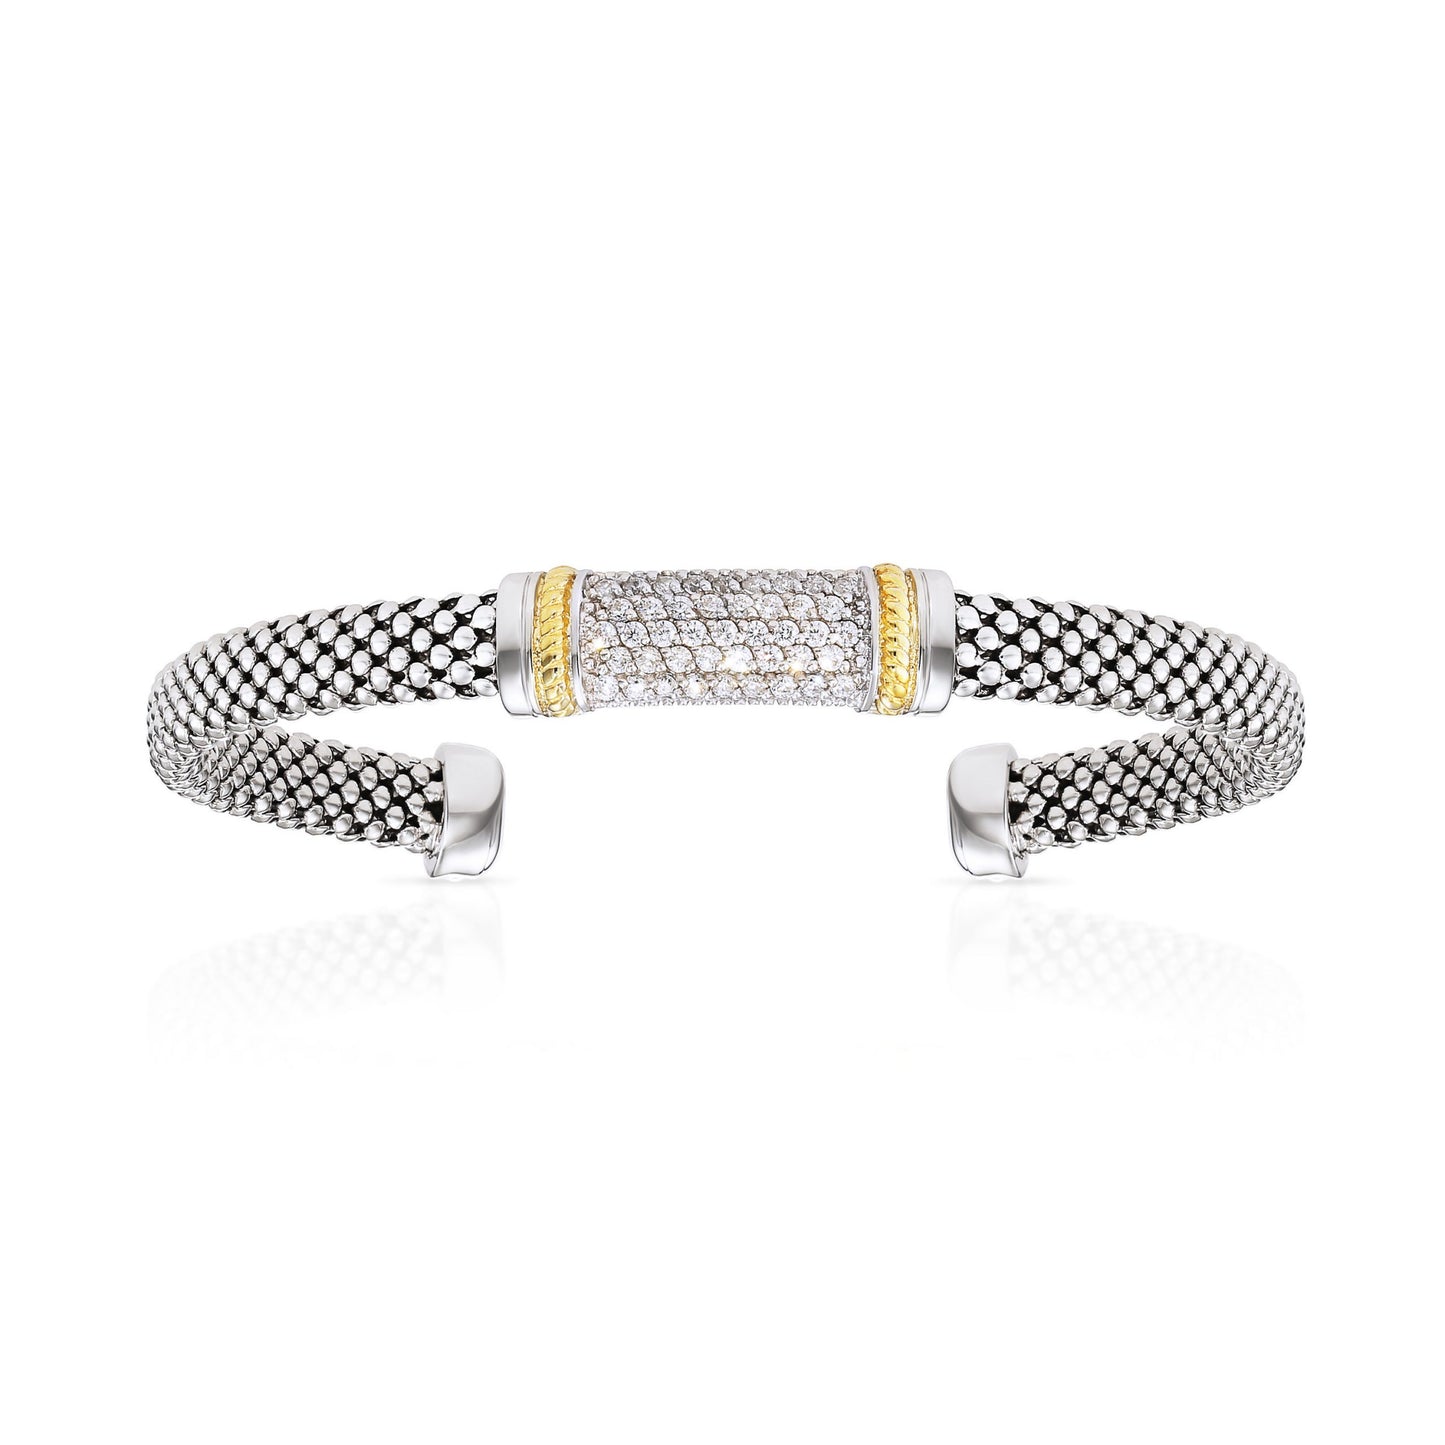 Italian Cuff Bracelet in Sterling Silver, Slip On Bangle with Gold Accents, Fits 7 and 8 inch wrist